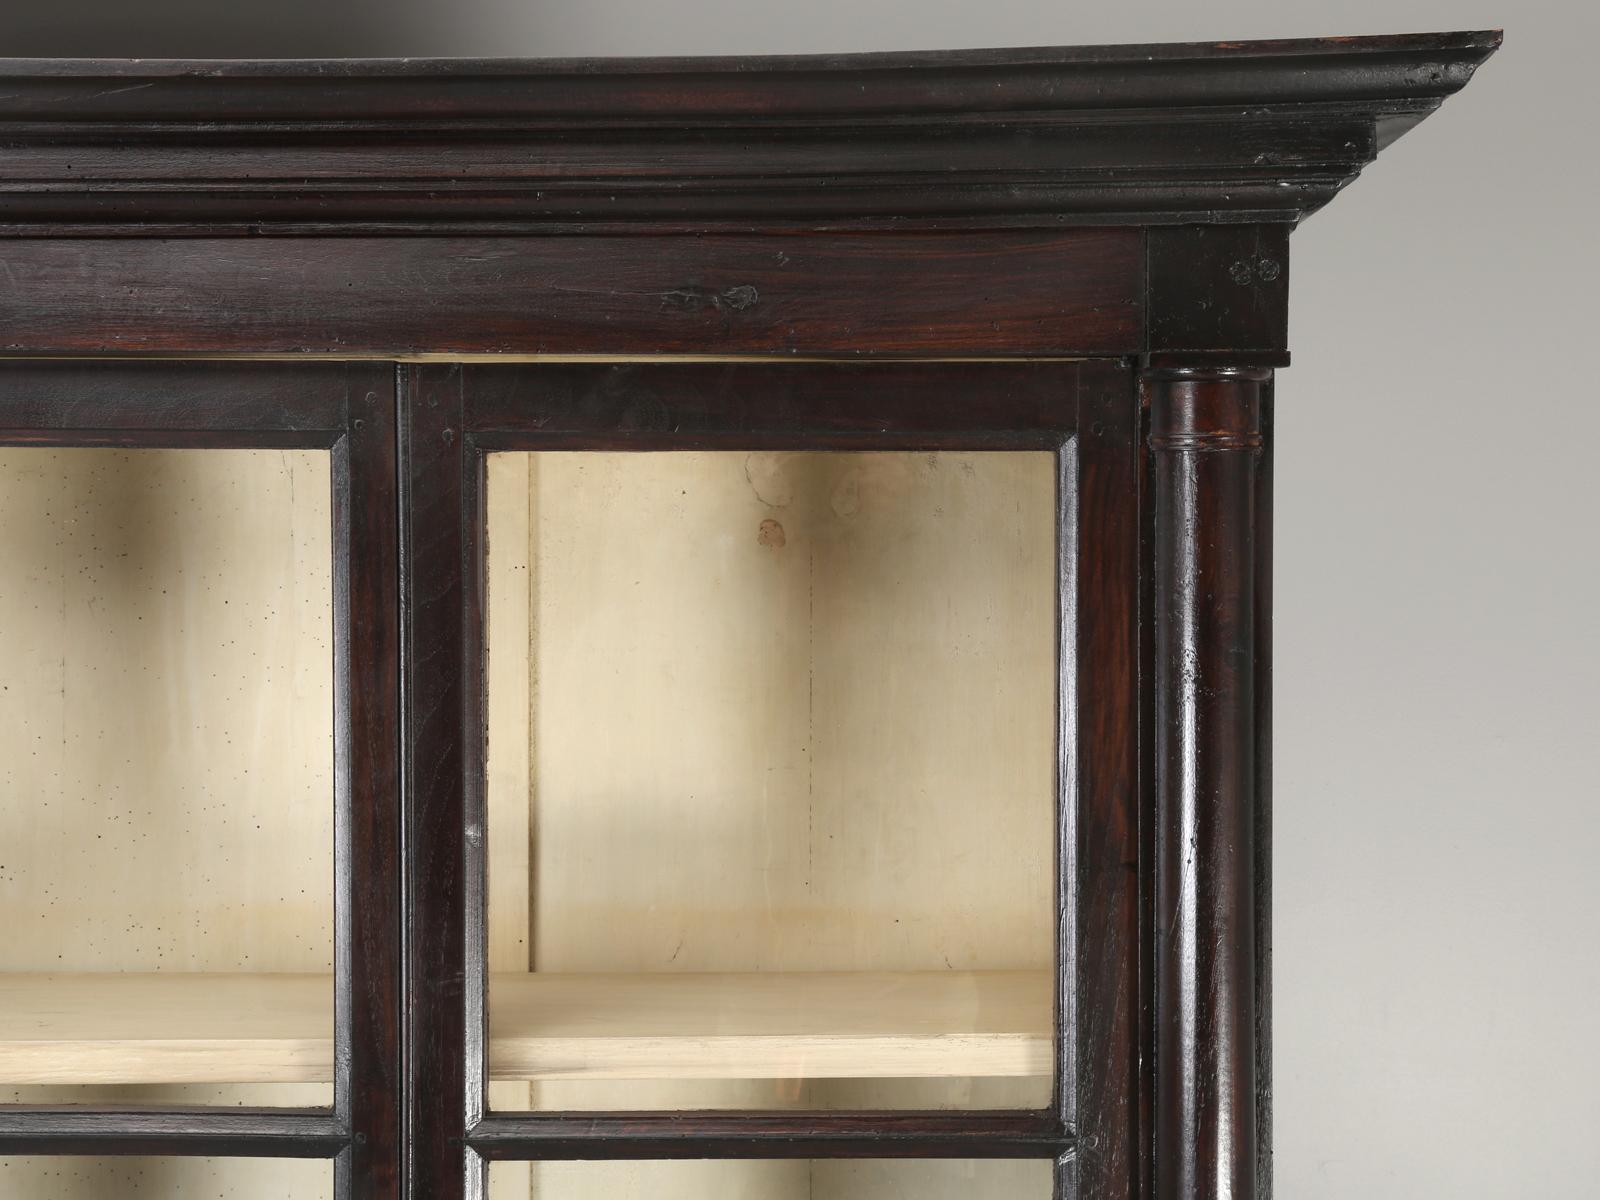 Early 19th Century Antique Époque French Empire Bookcase or Bibliothèque Fully Restored, 1800-1829